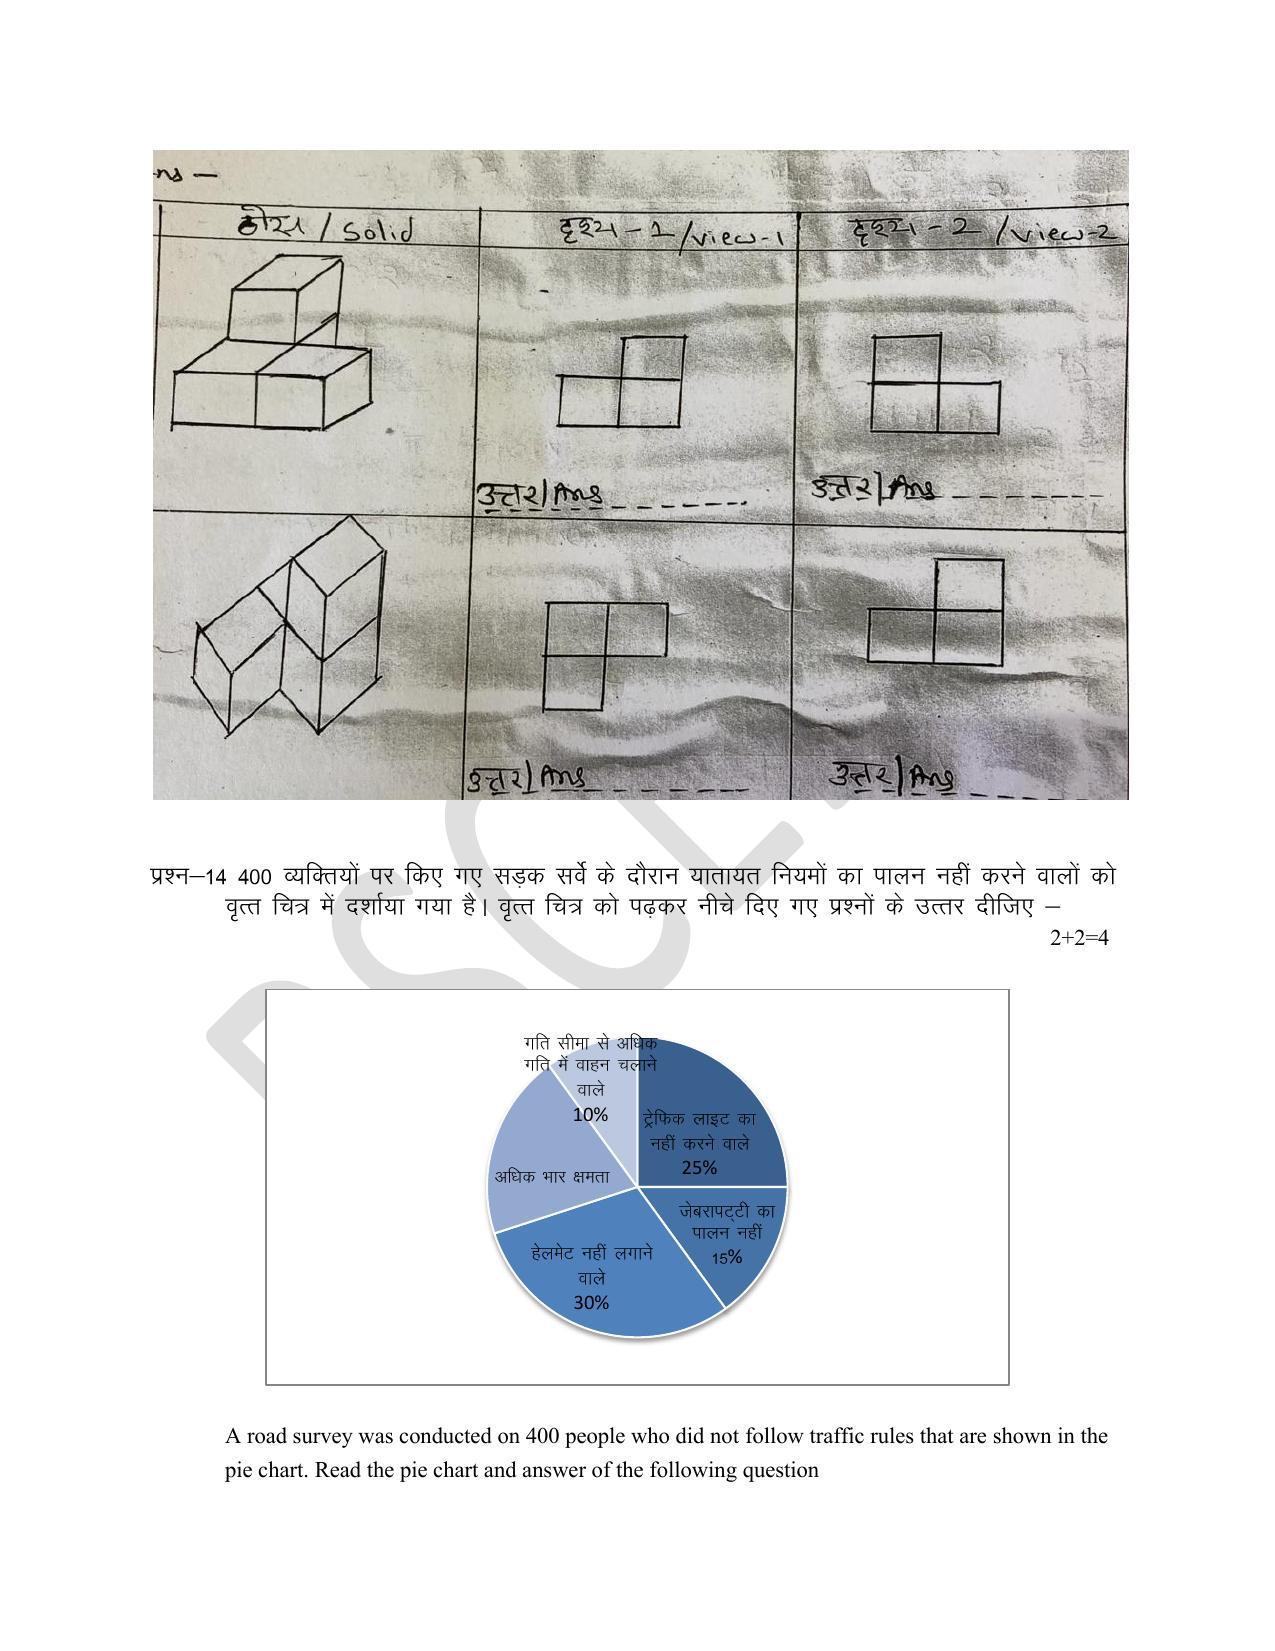 RBSE Class 8 Math & Science Sample Paper 2023 - Page 4